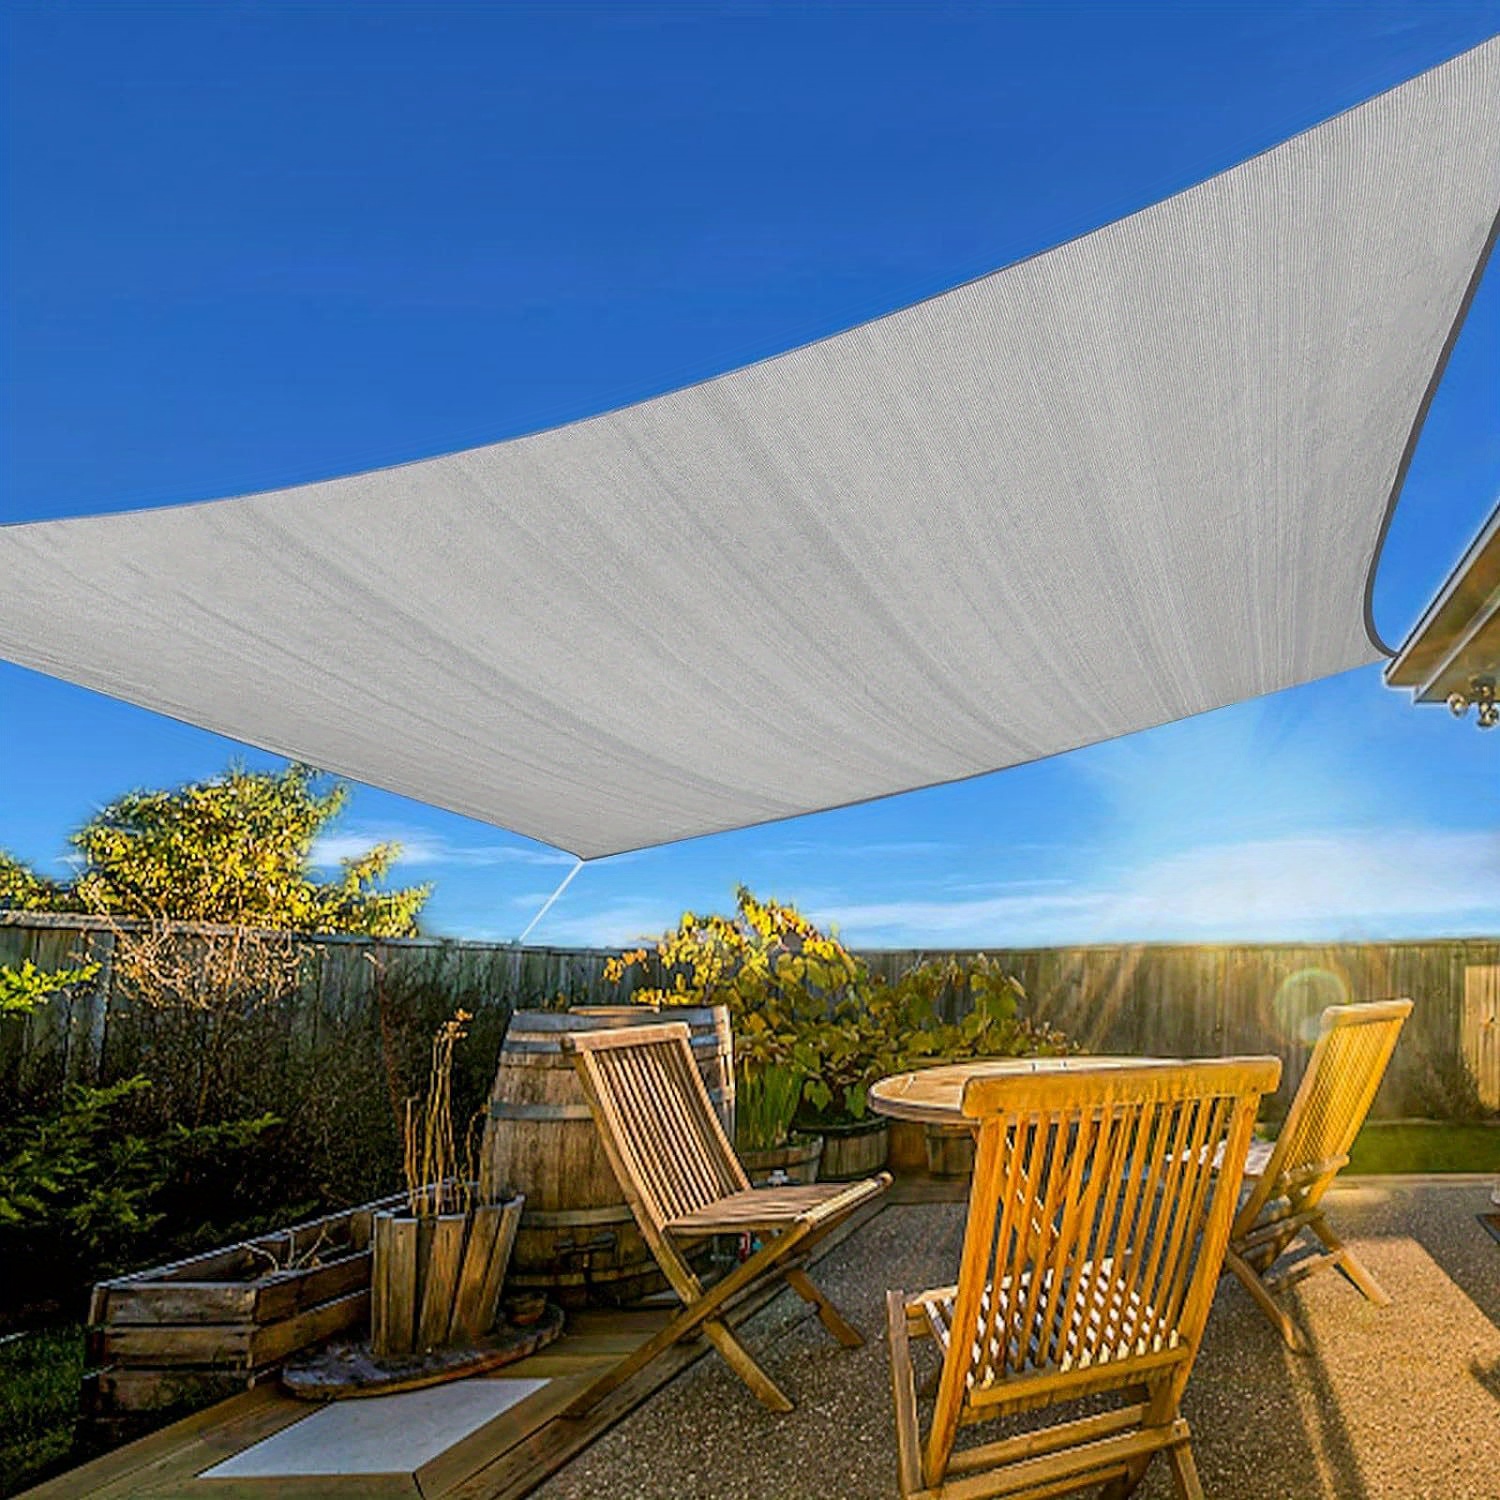 

Rectangular 20x26 Ft Sun Shade , Sand Color, Commercial Outdoor Canopy With Curved Edges, Heavy-duty 200gsm Breathable Fabric For Backyard, Patio, Garden, Sandbox, Includes 316 Stainless Steel D-rings